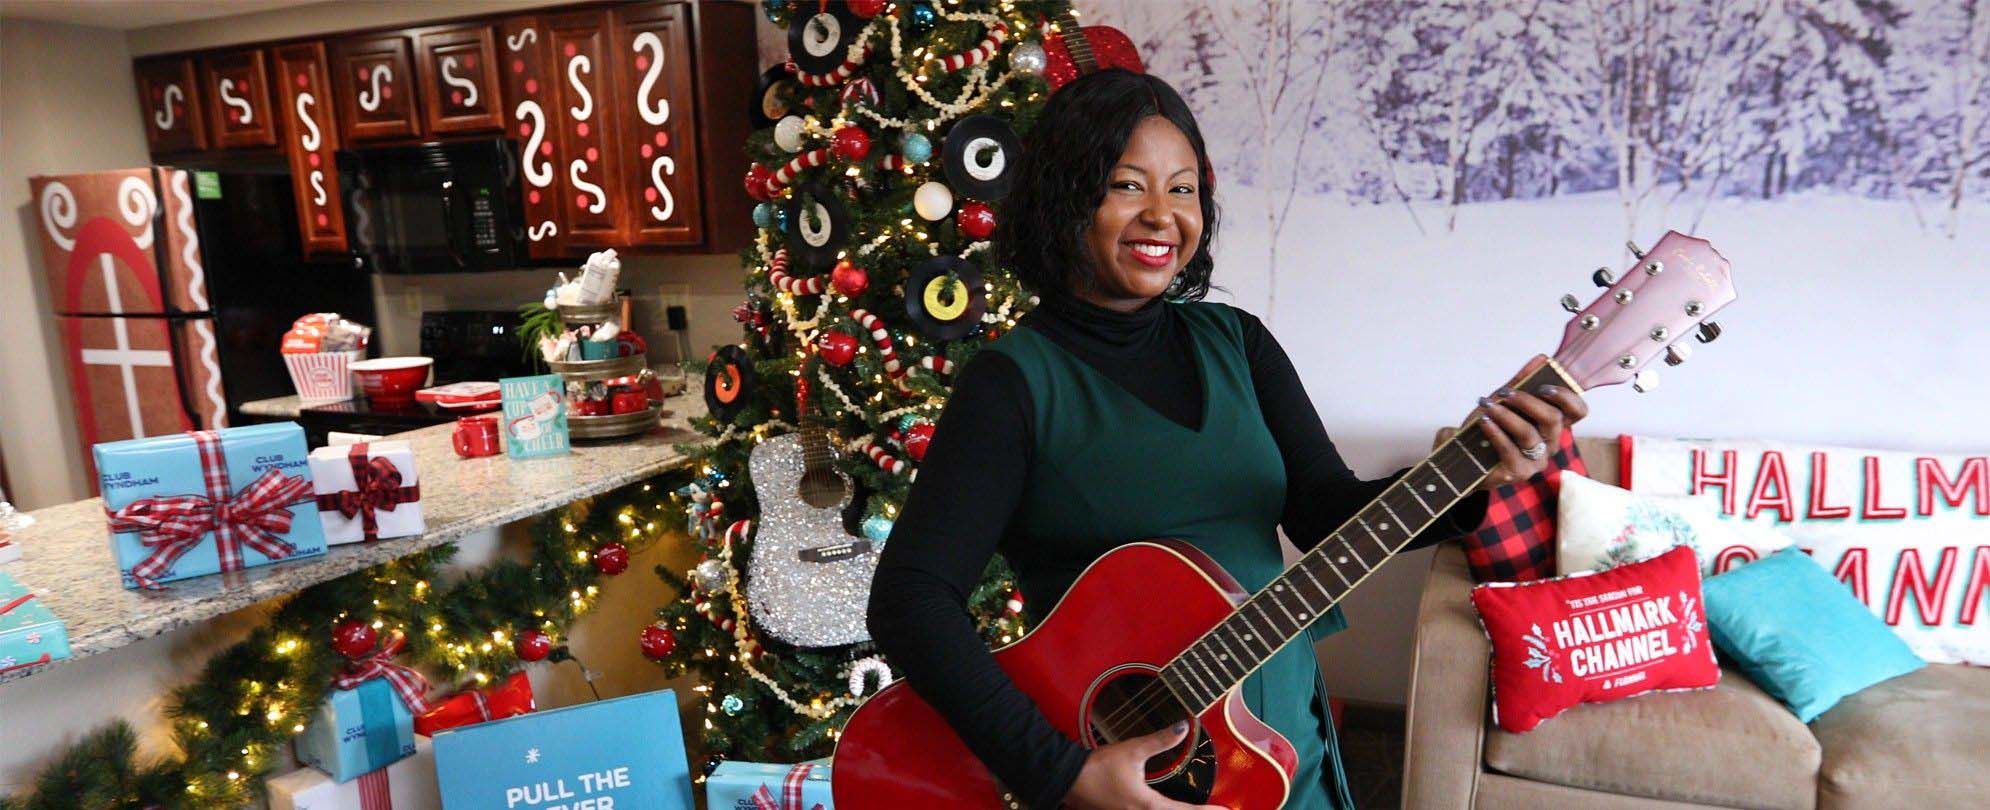 Melody poses with a guitar in front of a Christmas tree in the Hallmark Channel’s Countdown to Christmas Holiday Suite by Club Wyndham at Club Wyndham Nashville